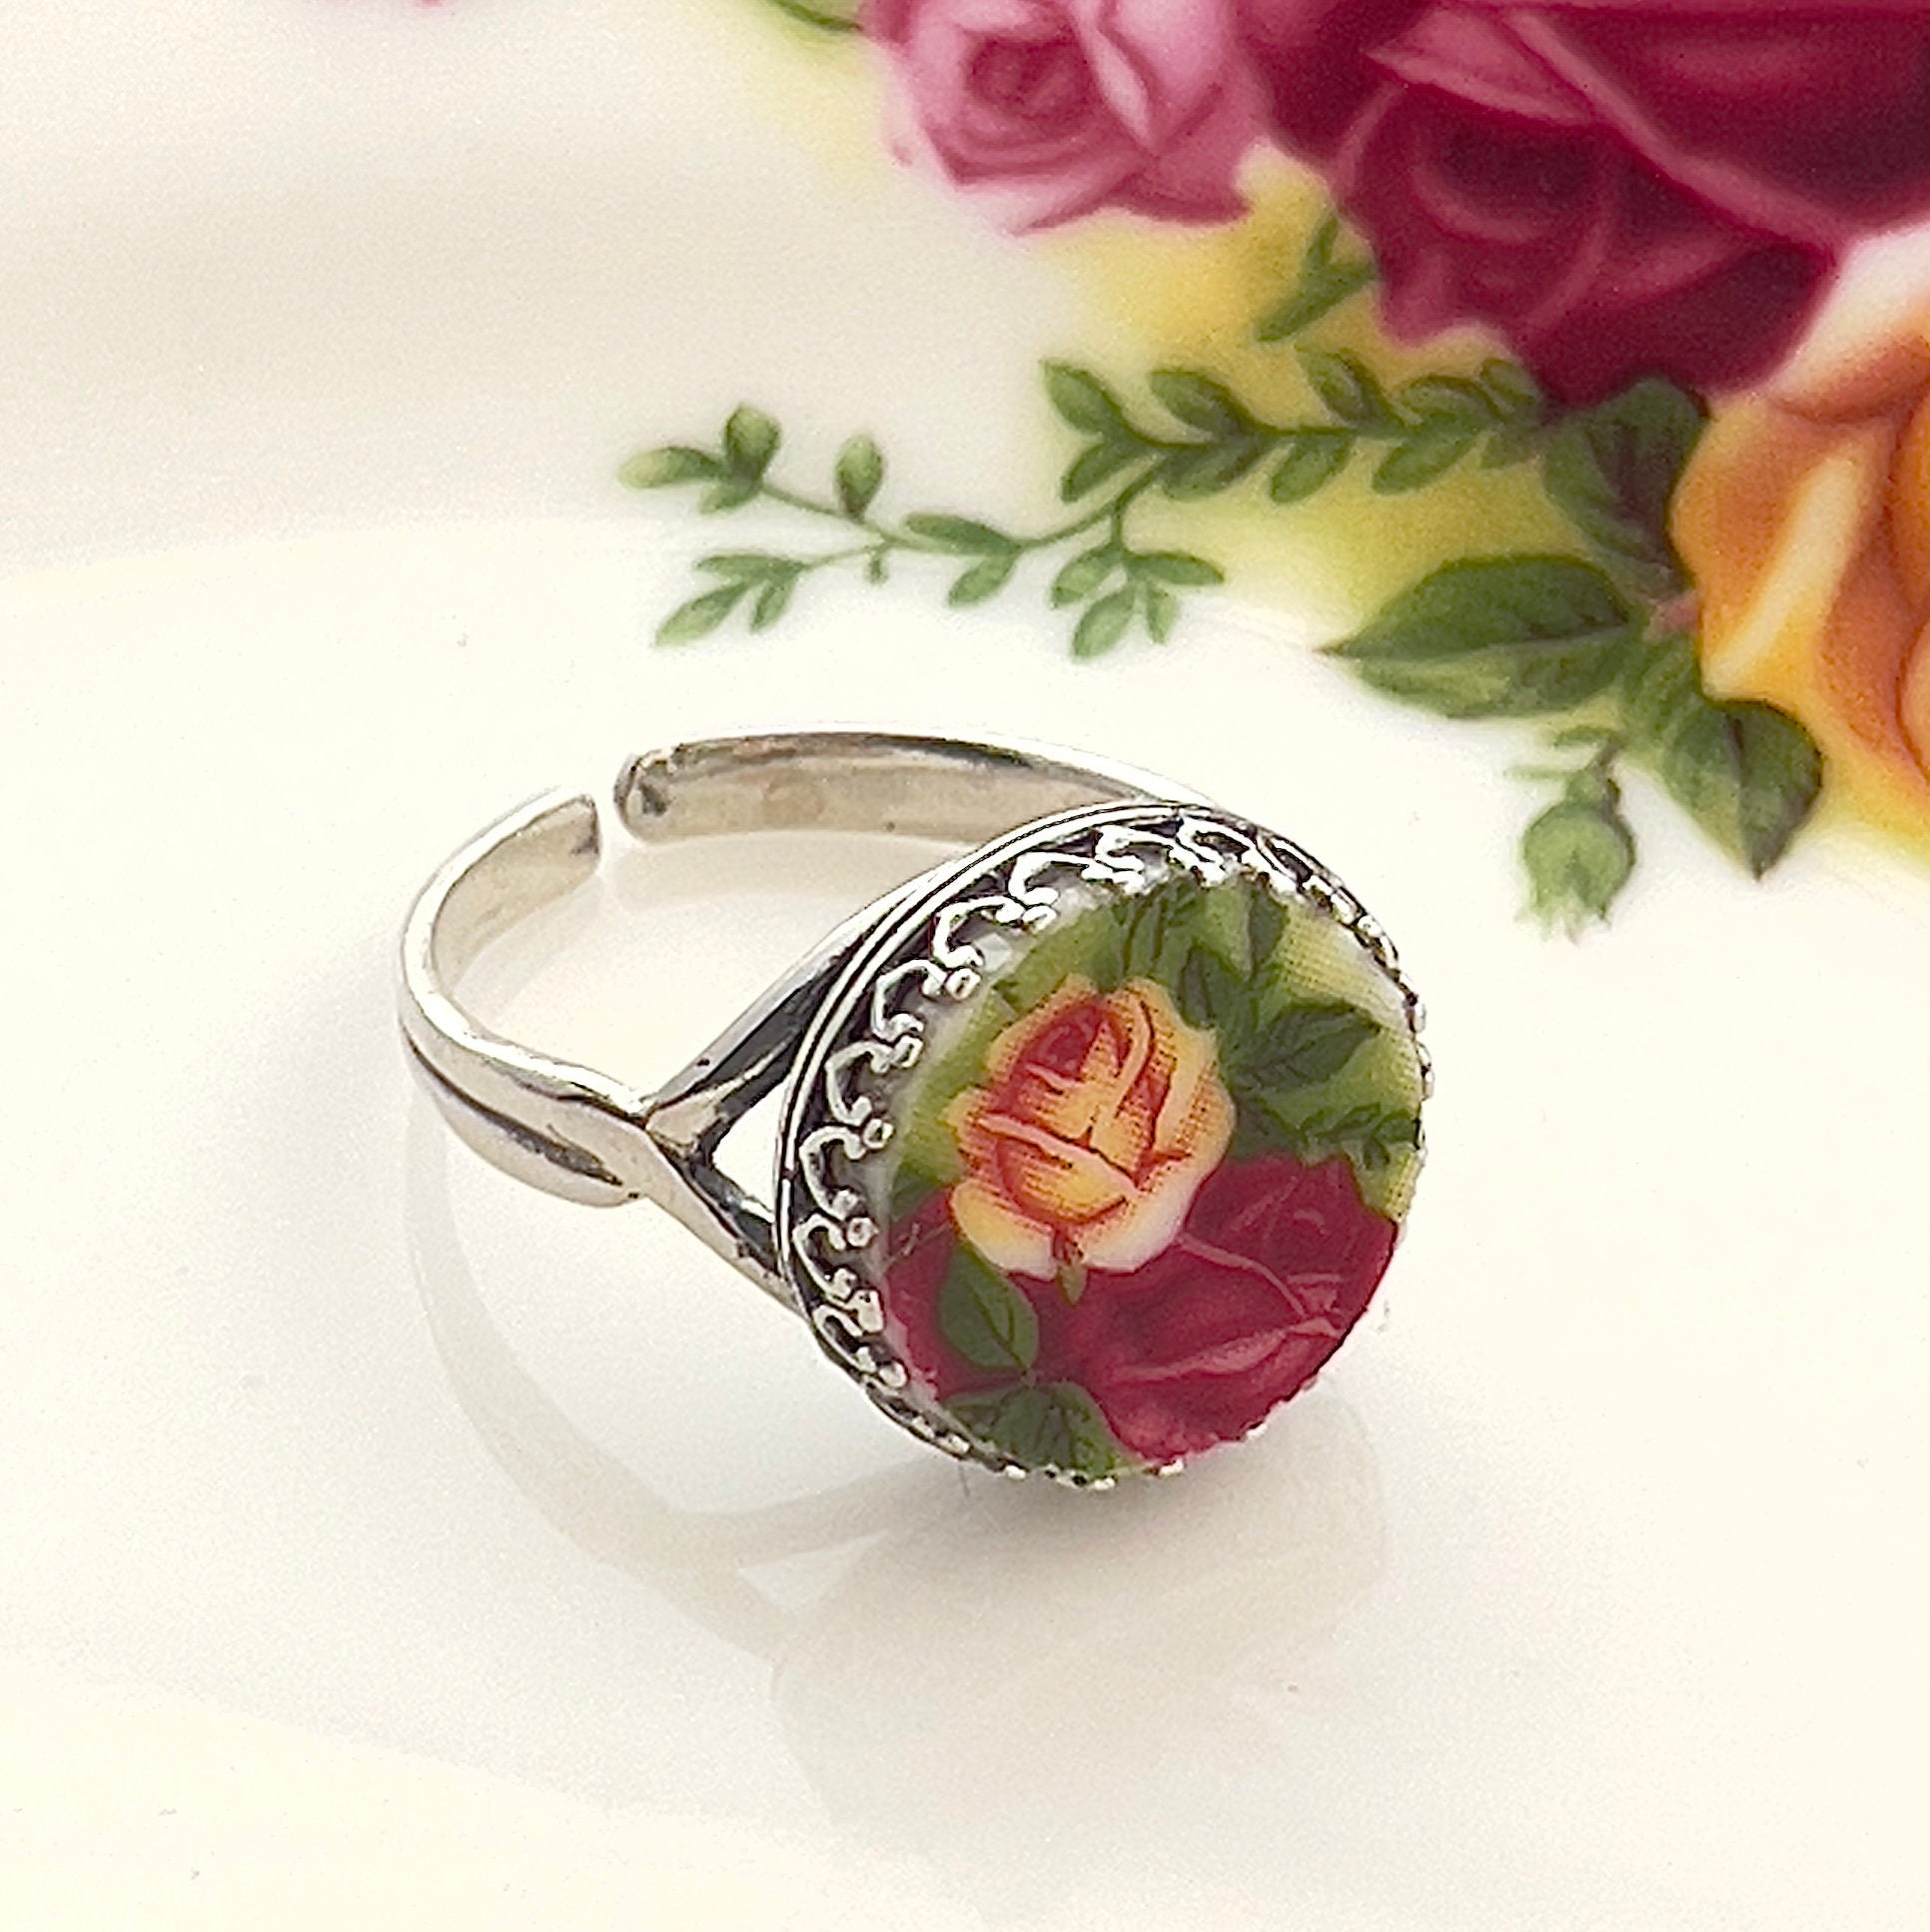 Love and Friendship Ring, Royal Albert Broken China Jewelry, Yellow and Red Rose Anniversary Gift for Her